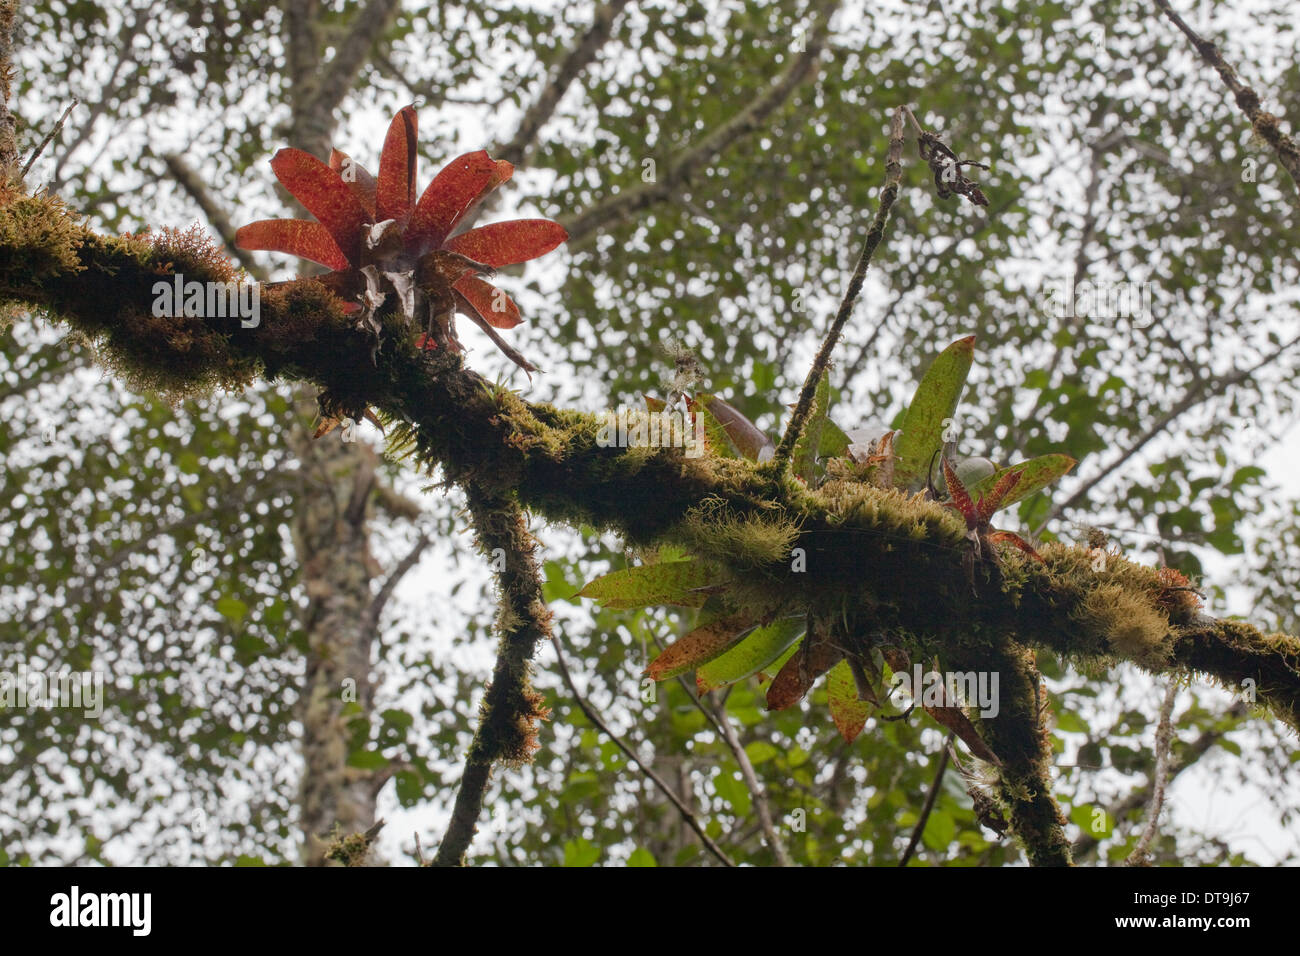 Bromeliads growing along a tree trunk. Tropical cloud forest. Costa Rica. Stock Photo